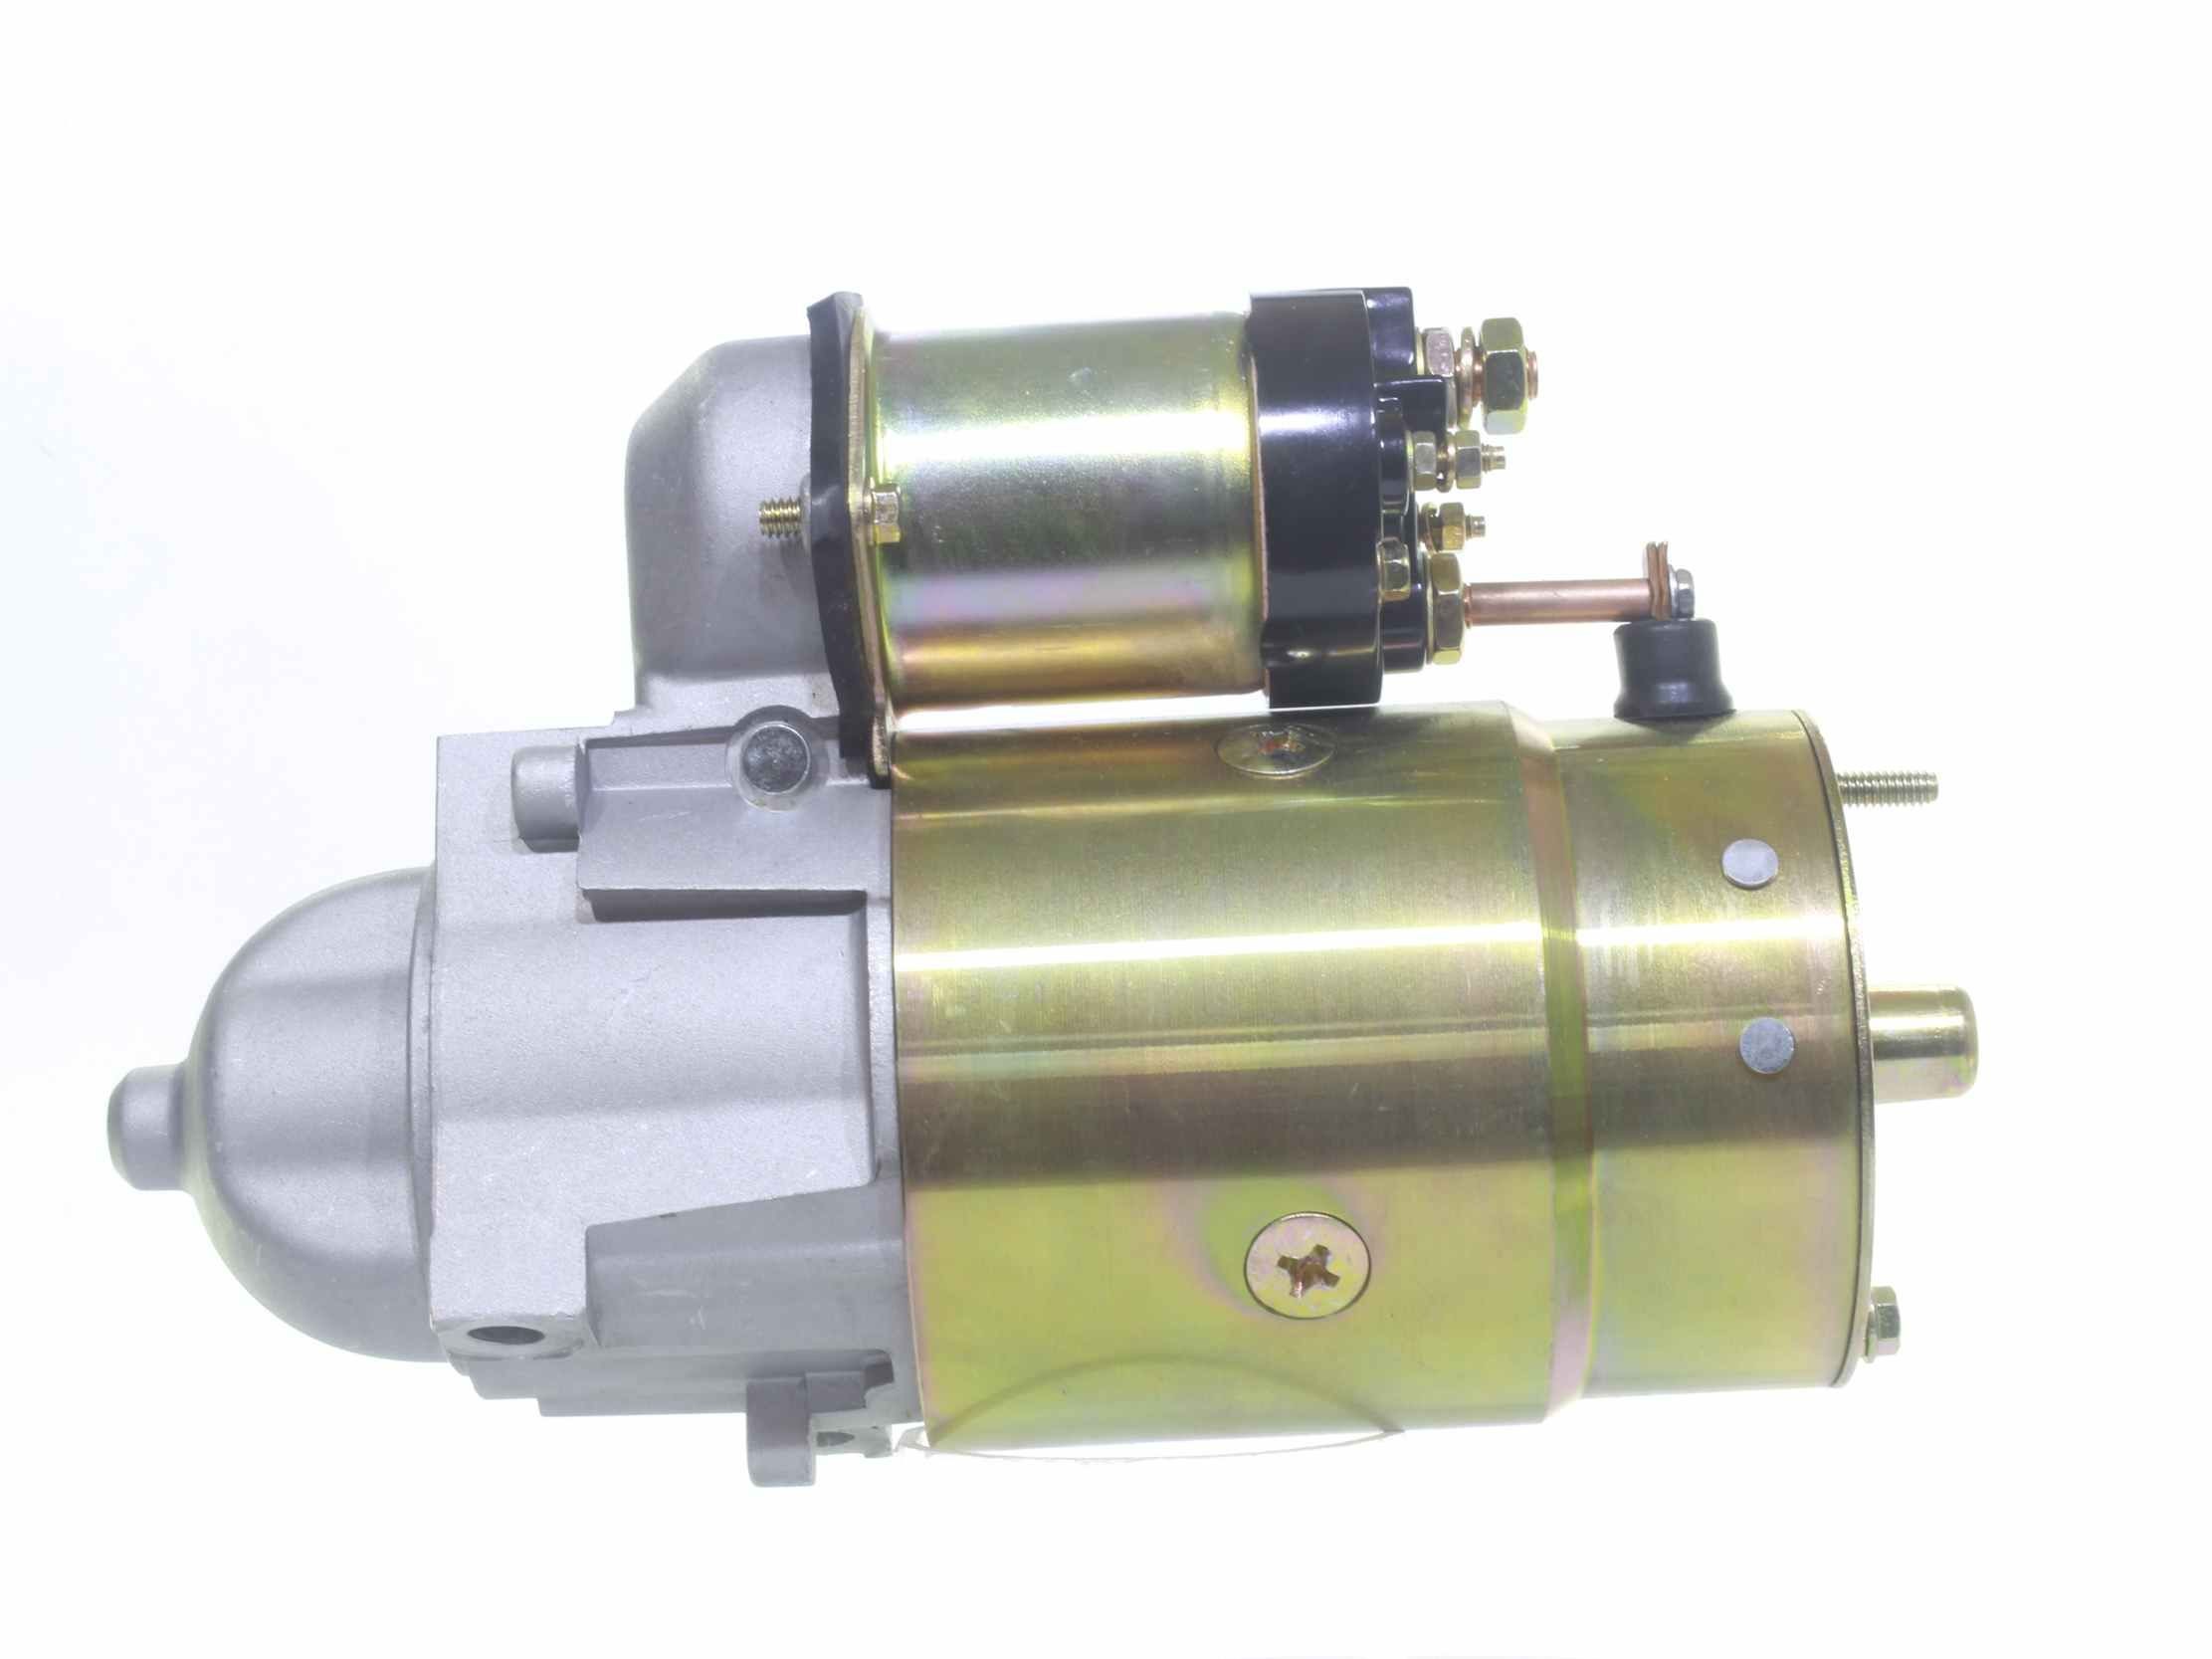 10440027 Engine starter motor ALANKO 1043510 review and test